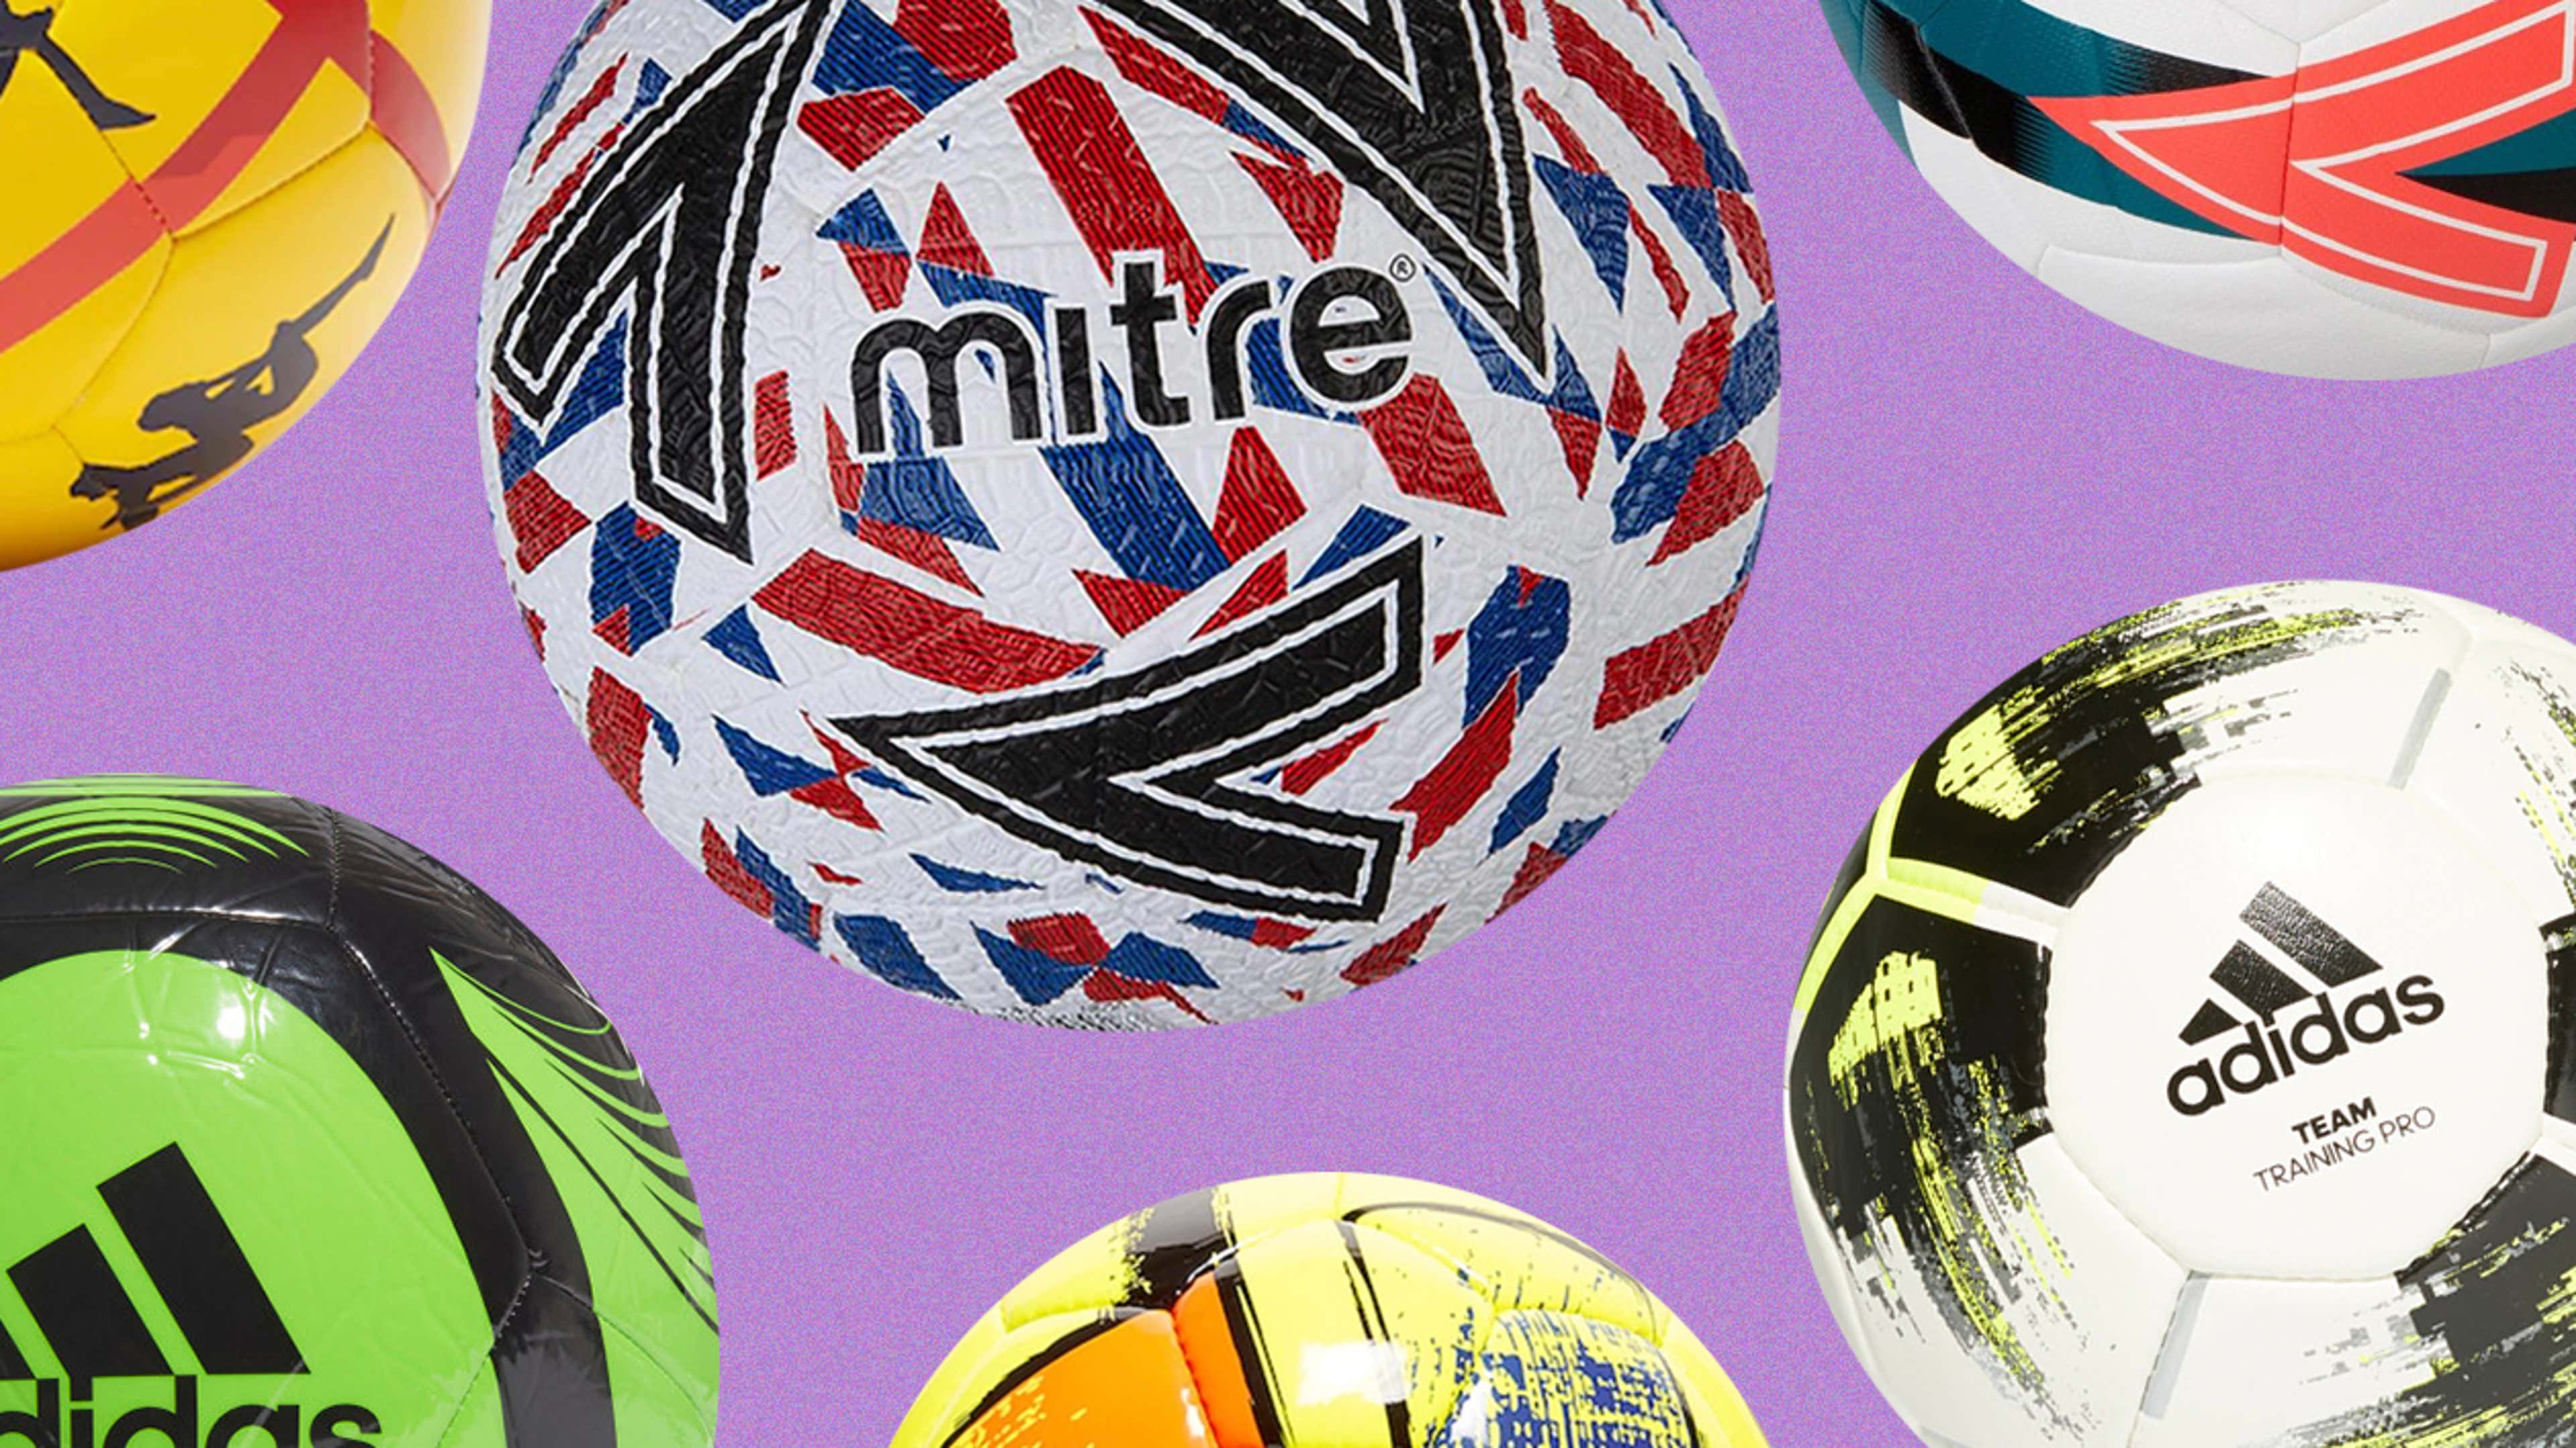 The Best Soccer Balls You Can Buy